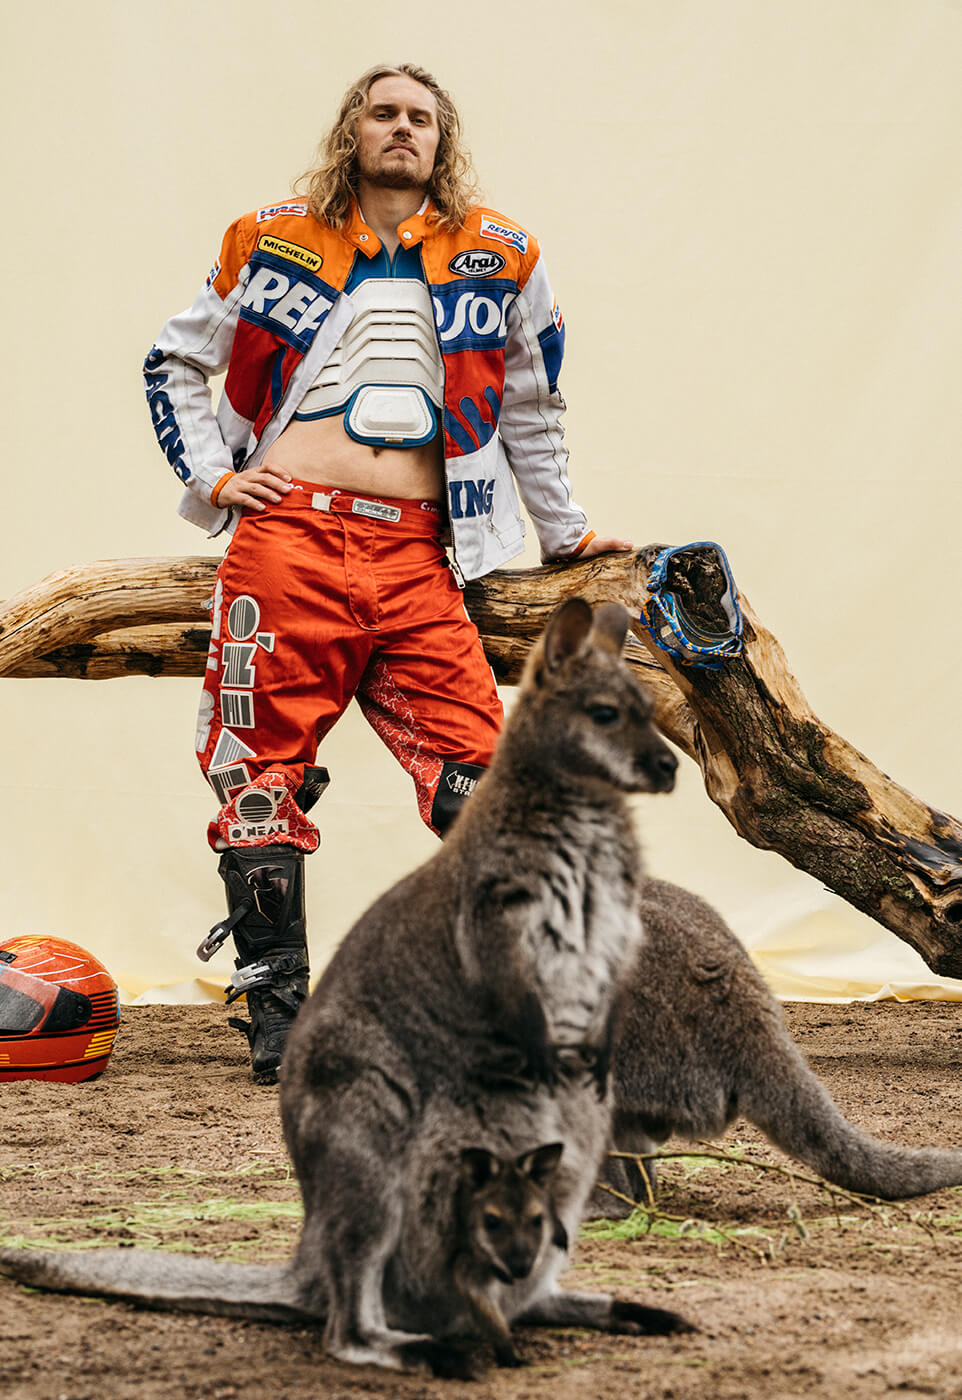 A portrait of a man wearing motocross gear posing with kangaroos